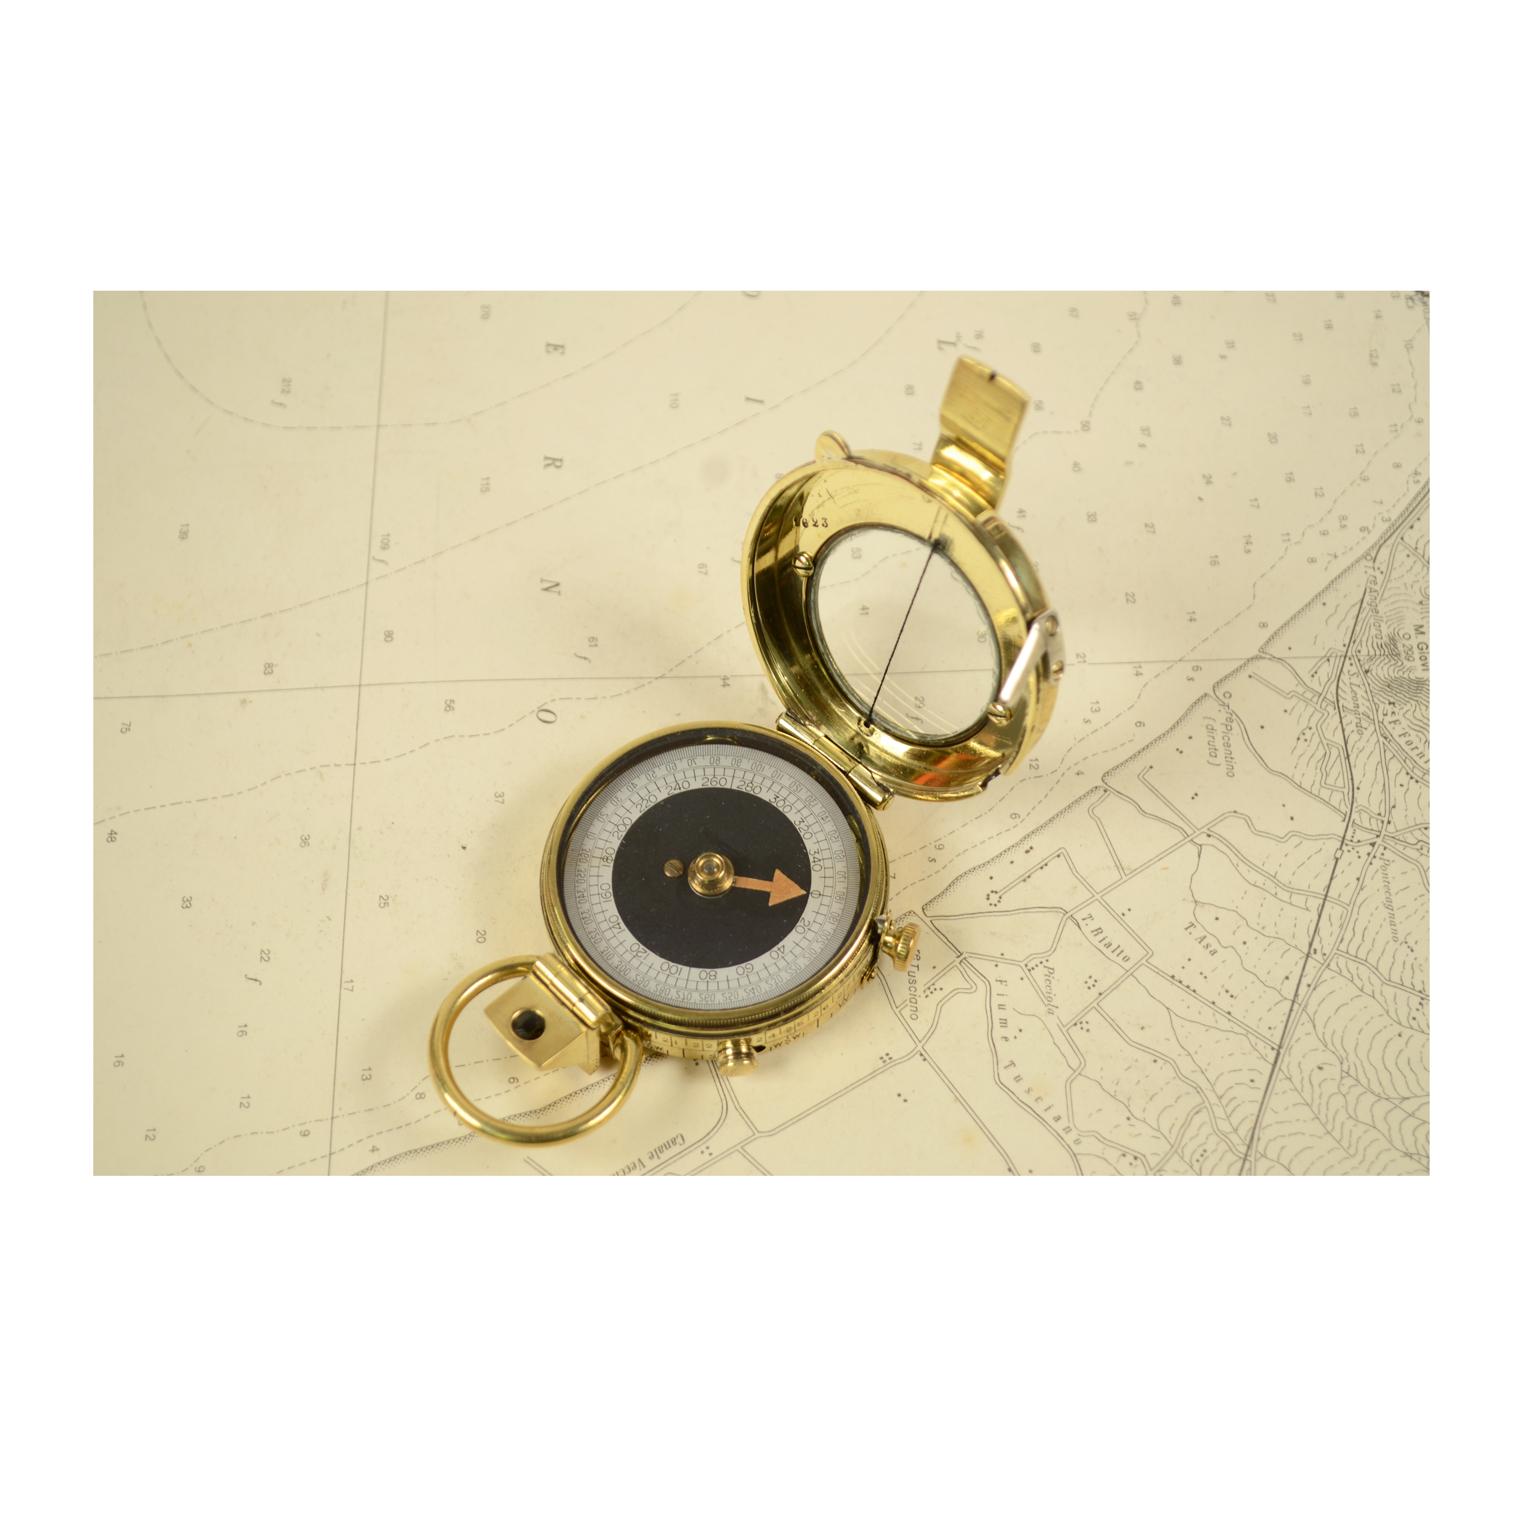 Prismatic bearing brass compass; it is a small compass, signed E. KOEHN Geneve Suisse n.155374, model Verner's Pattern from the name of the designer, Colonel William Willoughby Cole Verner (1852-1922) and produced in 1918 and supplied to British